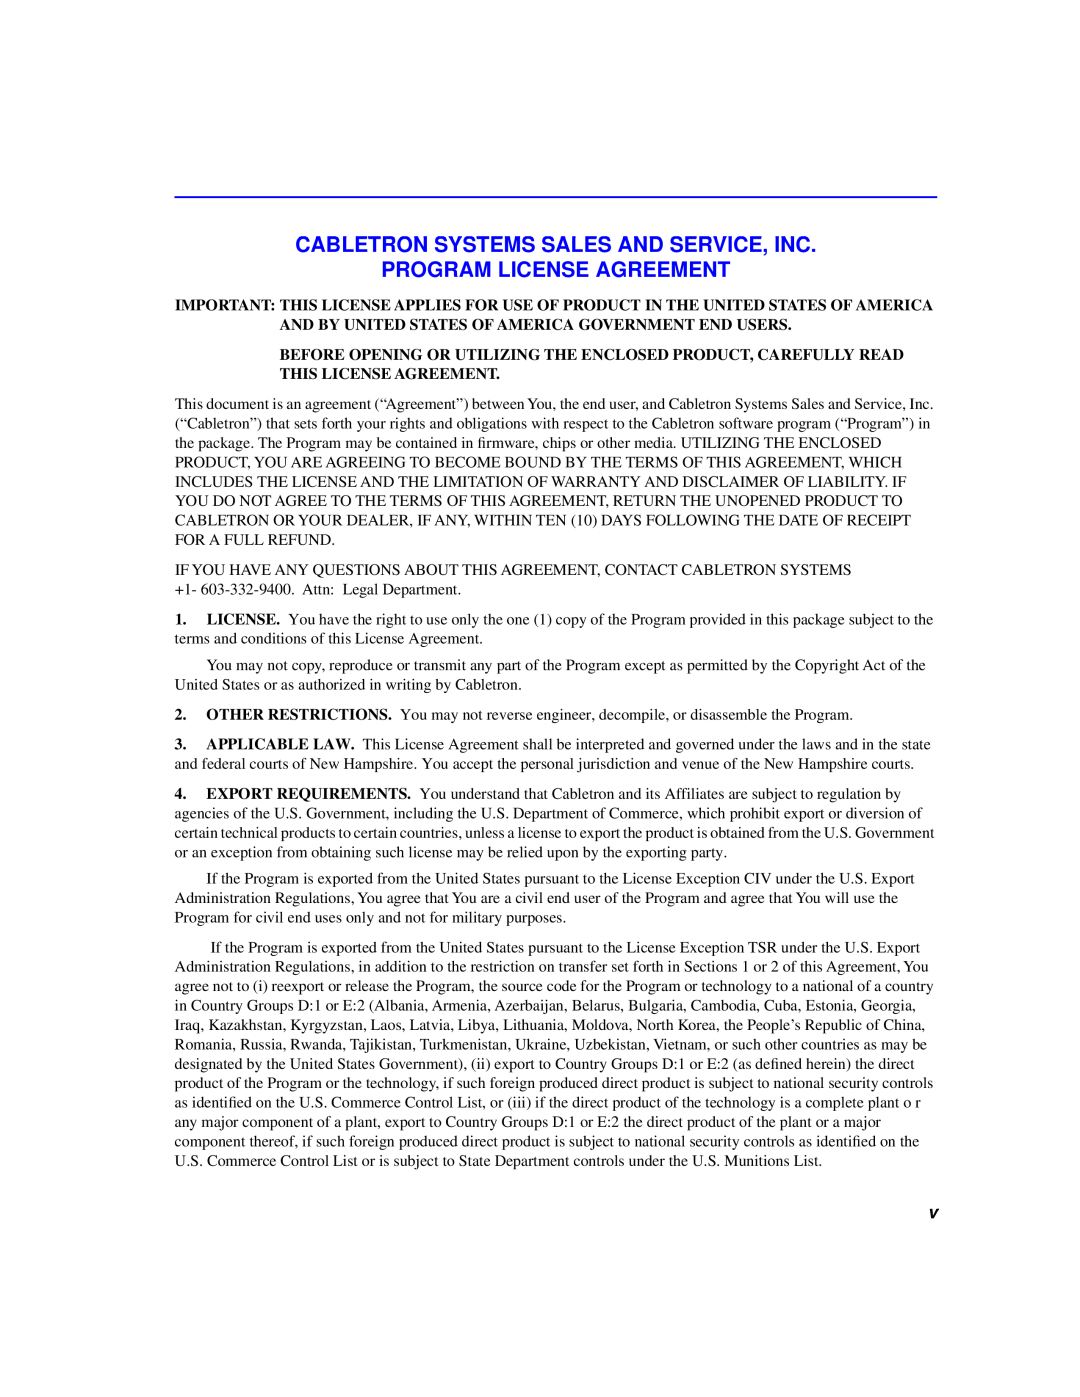 Cabletron Systems 2H253-25R manual Cabletron Systems Sales And Service, Inc Program License Agreement 